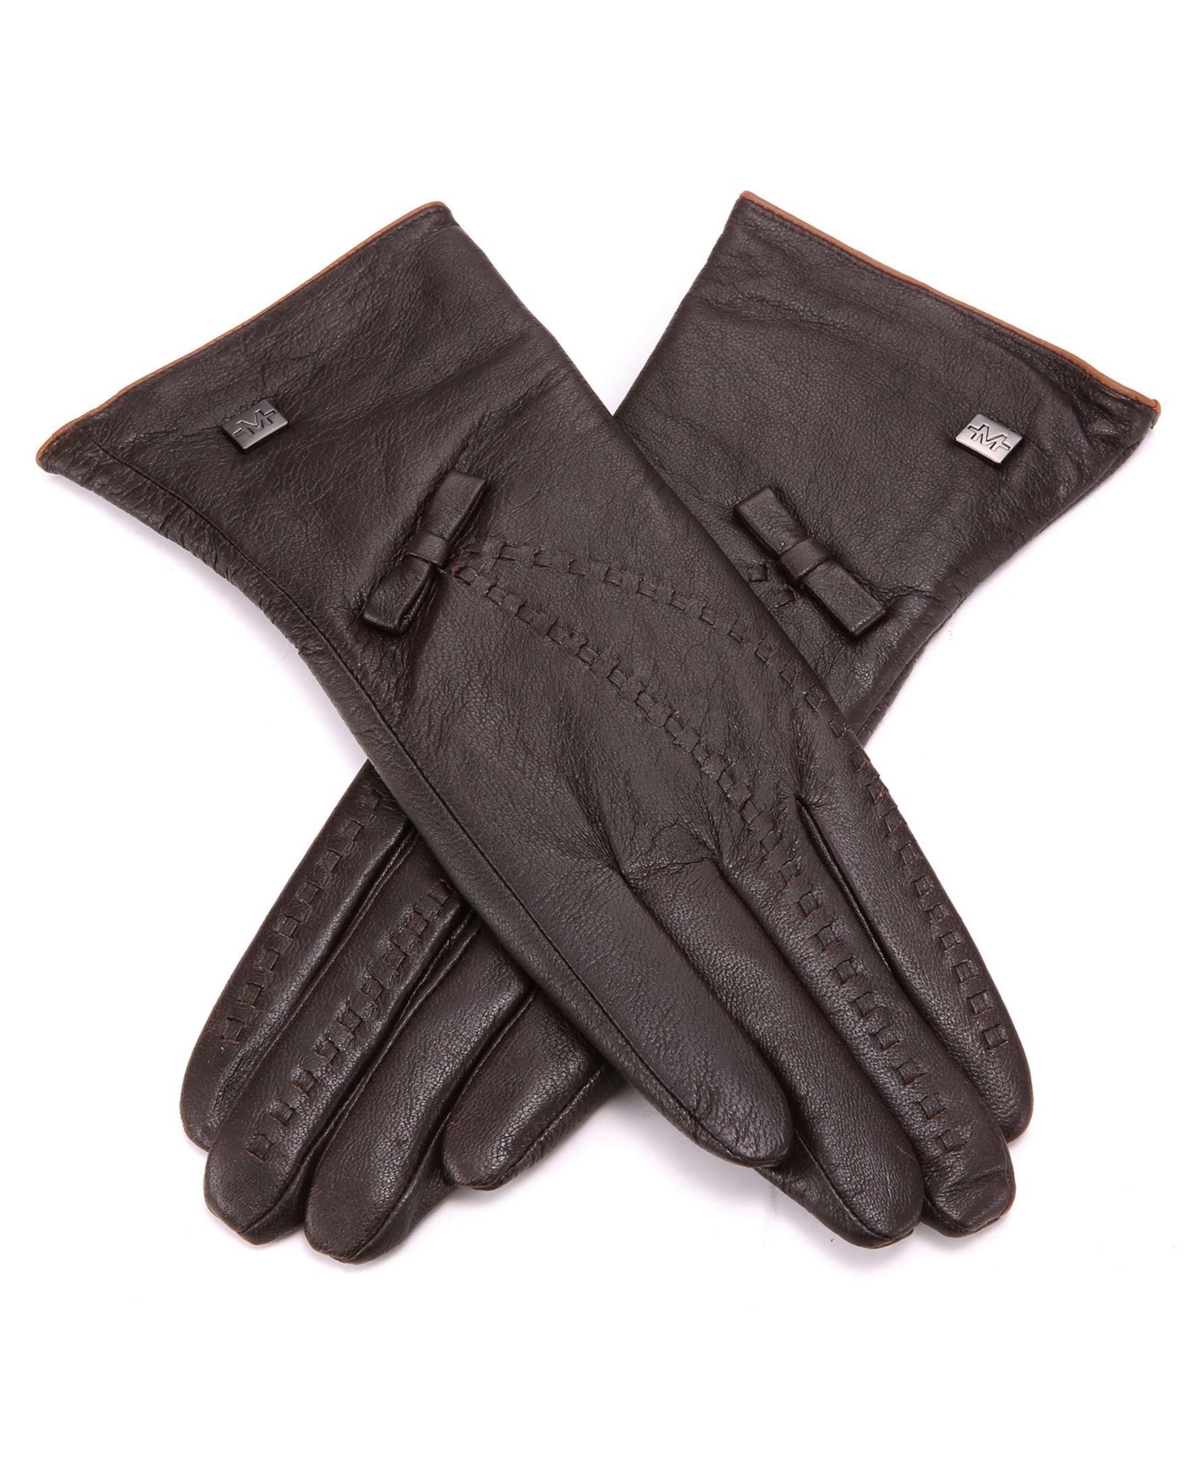 Women's Bow Design Waterproof Leather Gloves - Brown